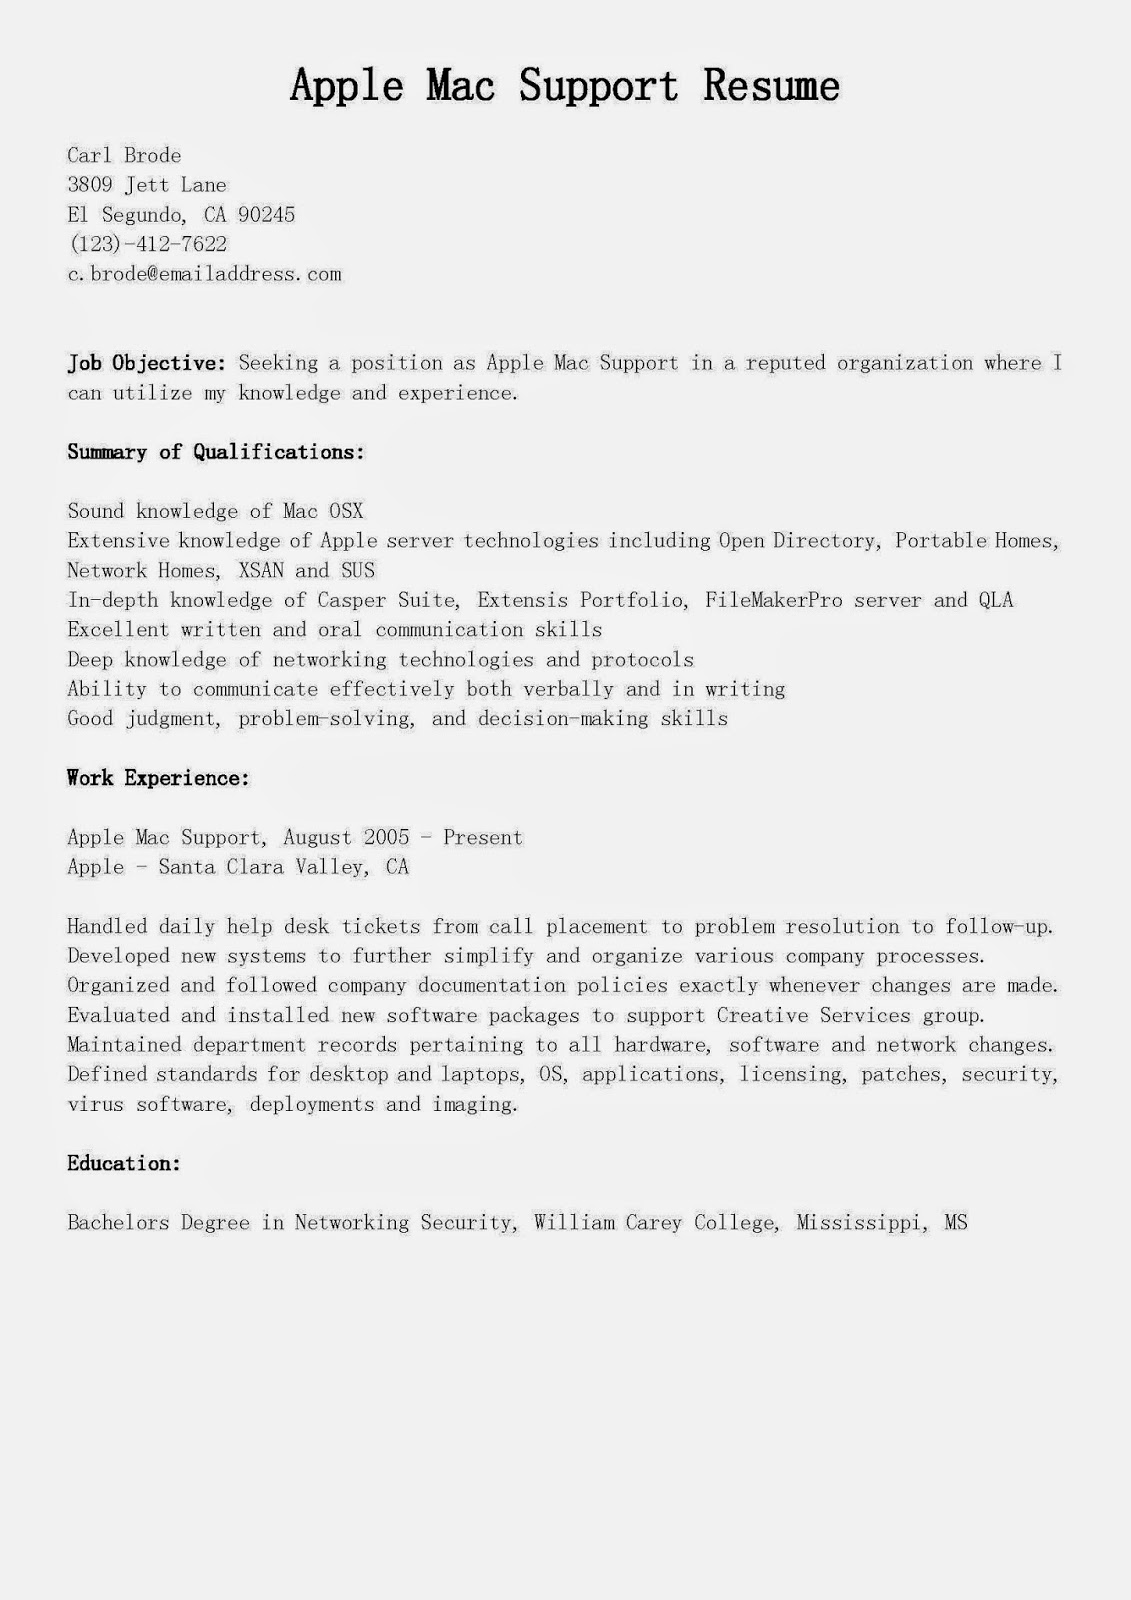 Resume Templates for Mac Awesome Resume Samples Apple Mac Support Resume Sample